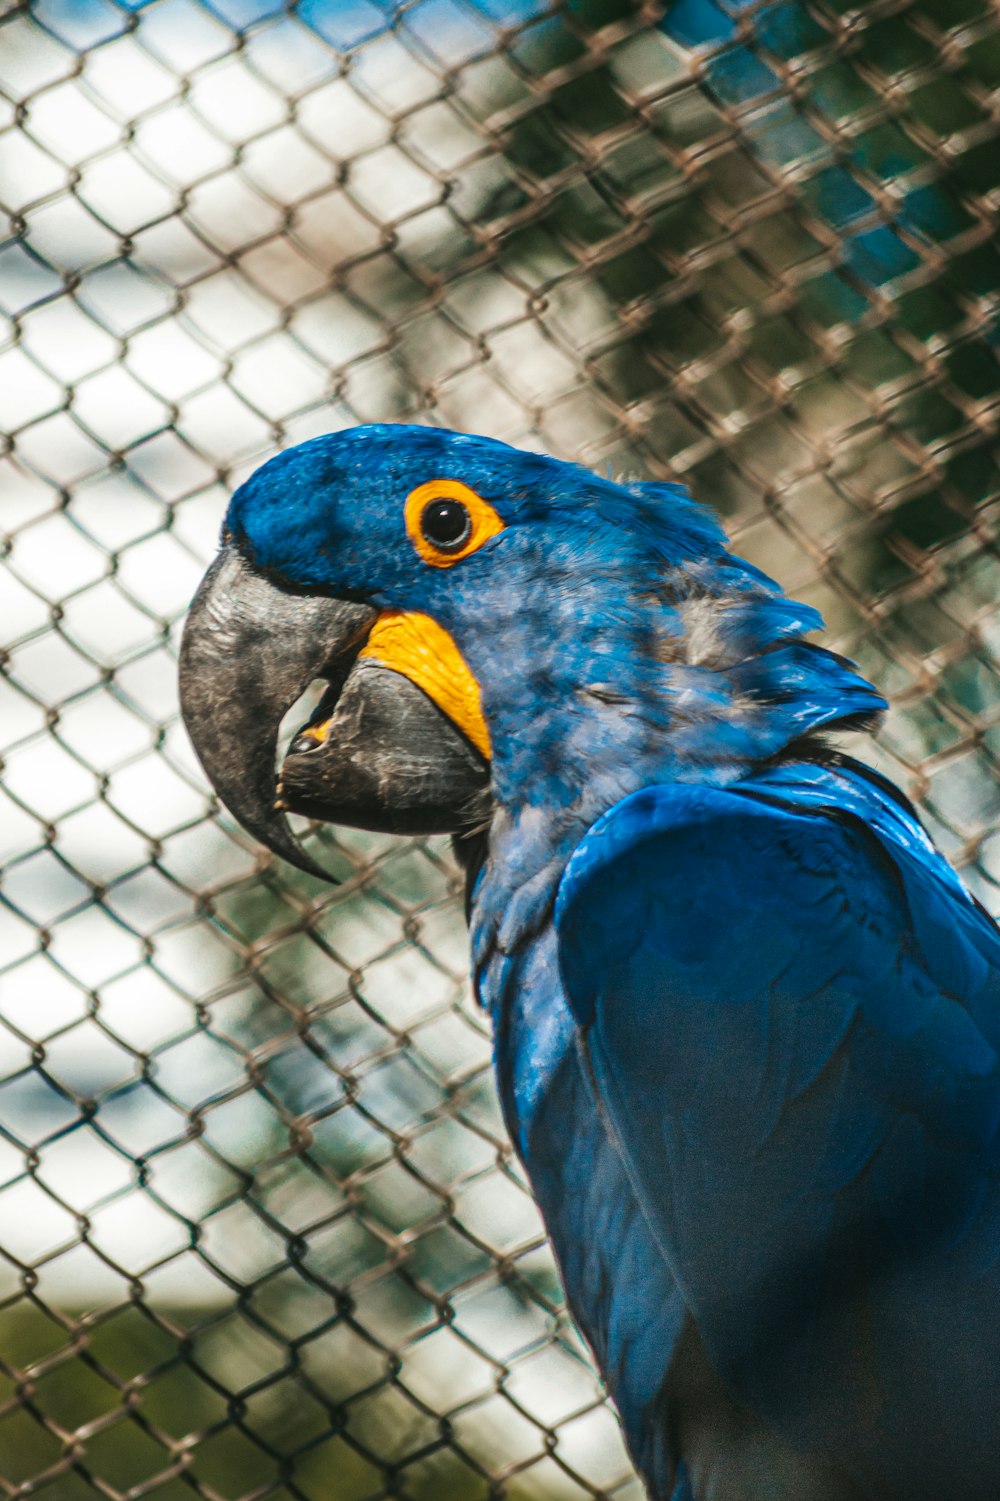 a blue and yellow parrot standing next to a fence